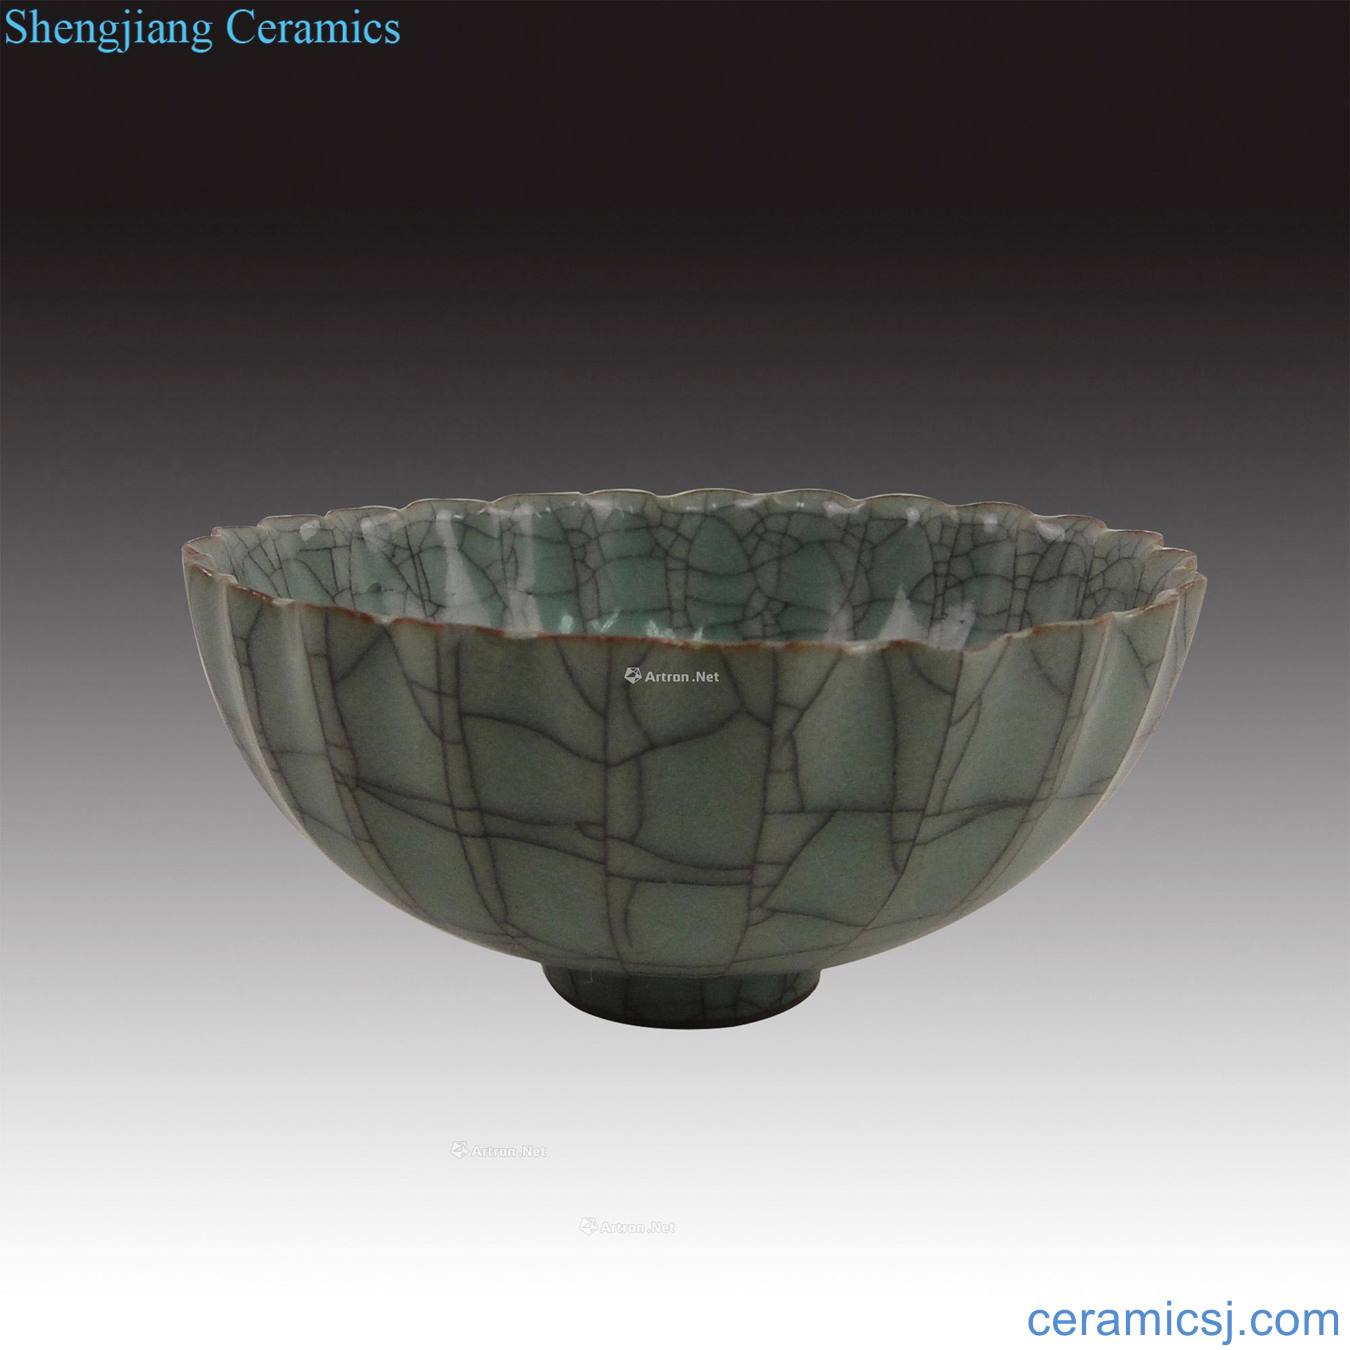 Northern song dynasty kiln mouth cracked ice flower bowl